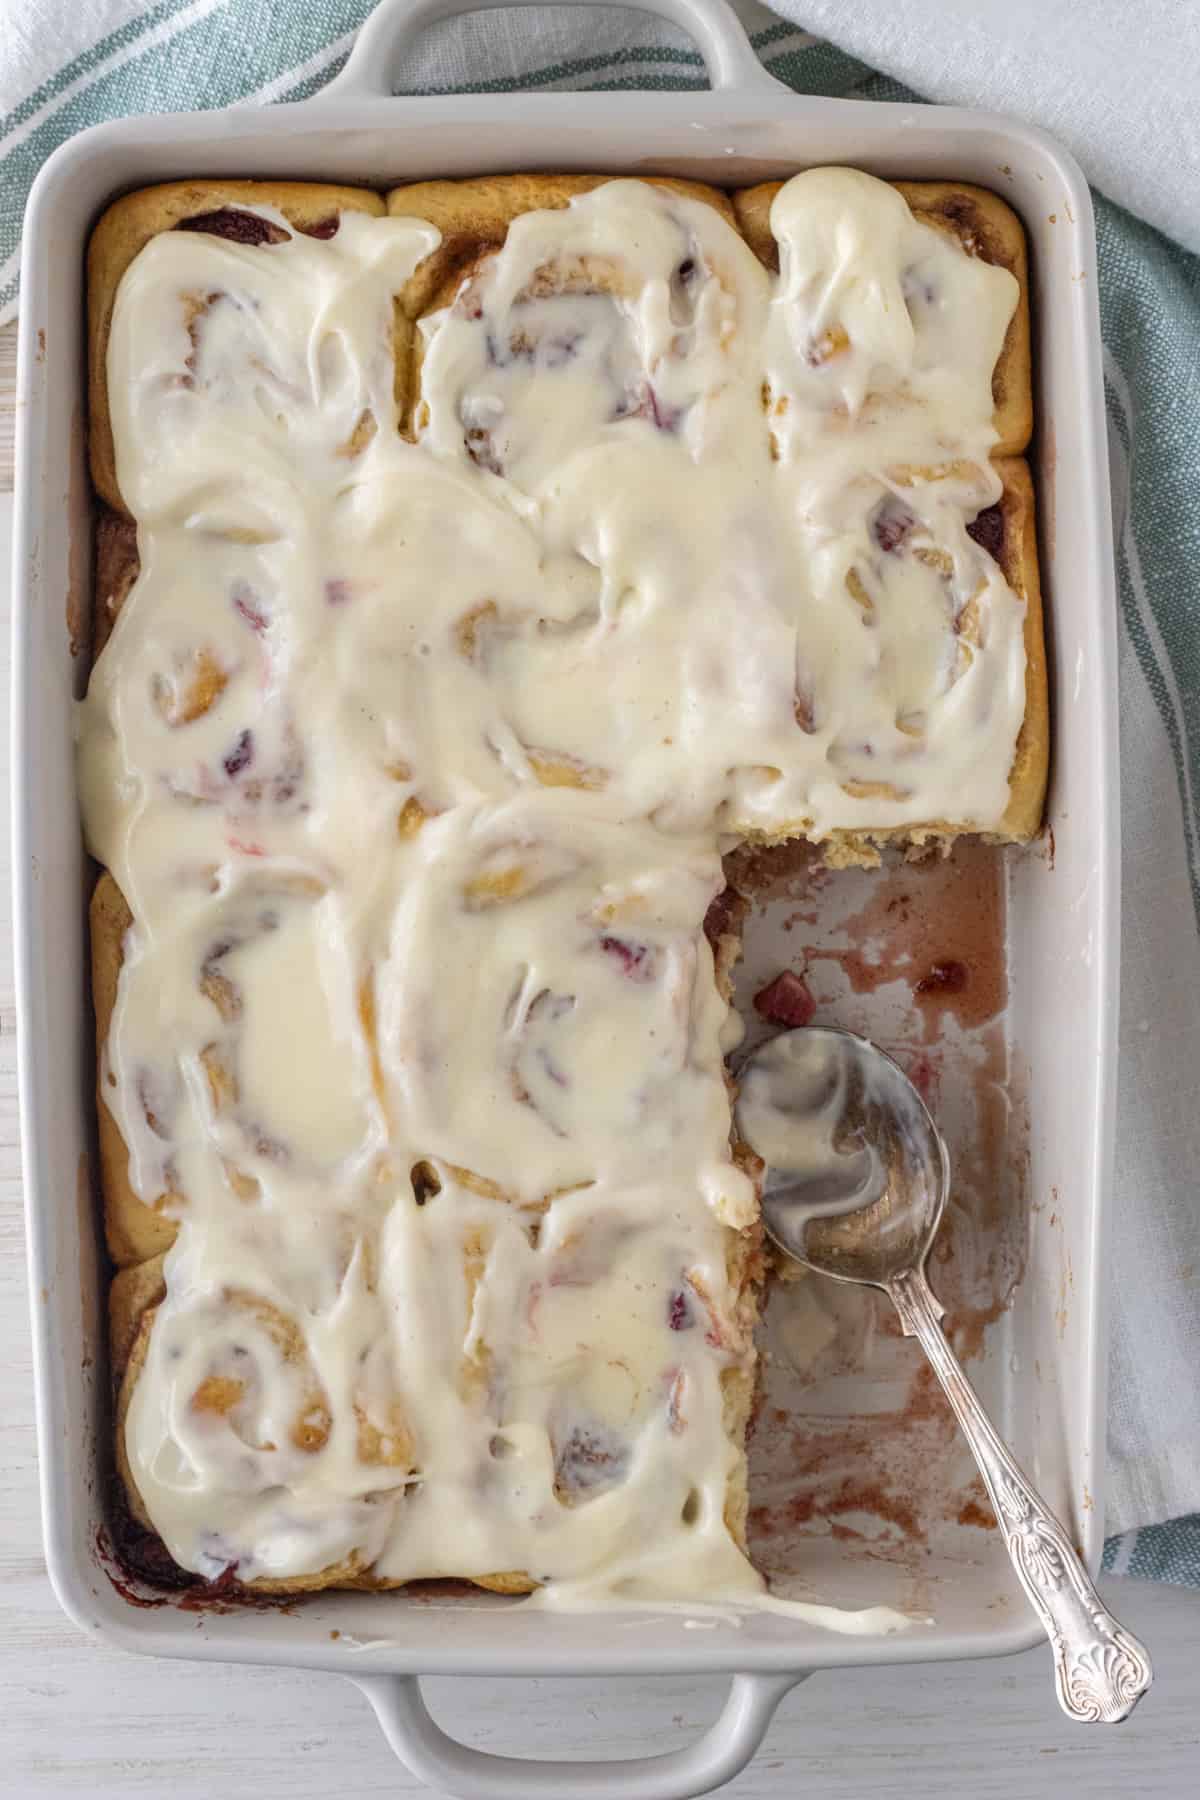 Strawberry cinnamon rolls in a baking dish with 2 missing and a spoon in the empty space.